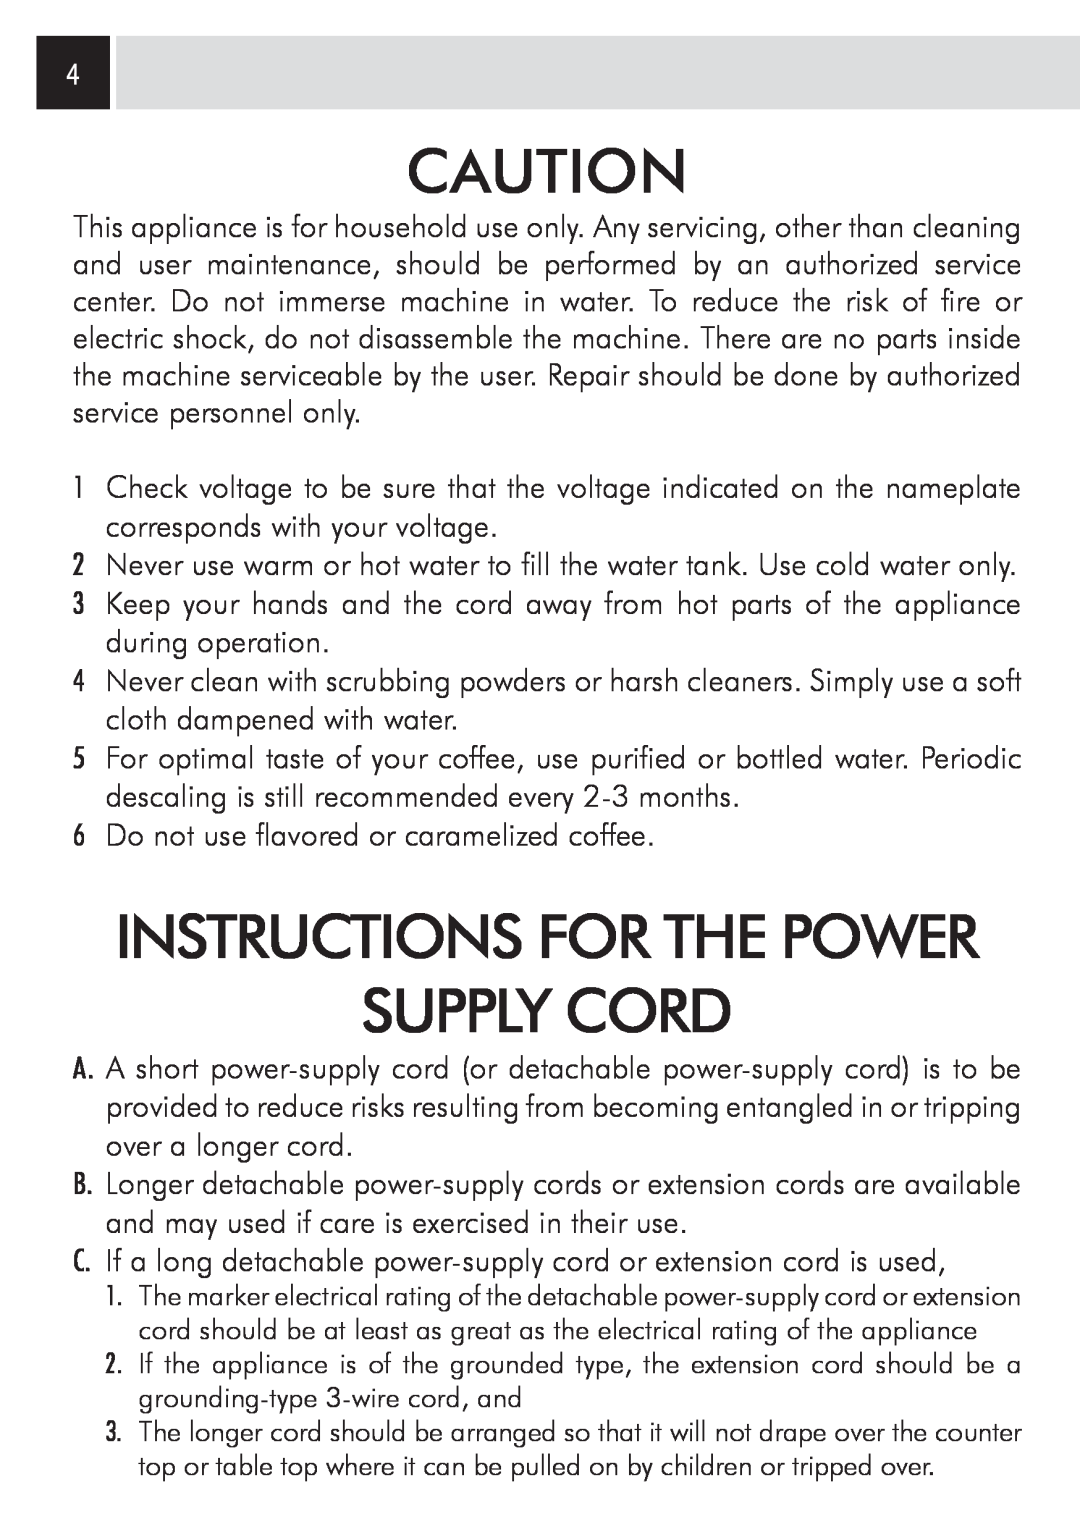 Saeco Coffee Makers SUP031OR, Odea Giro Plus manual Supply Cord, Instructions For The Power 